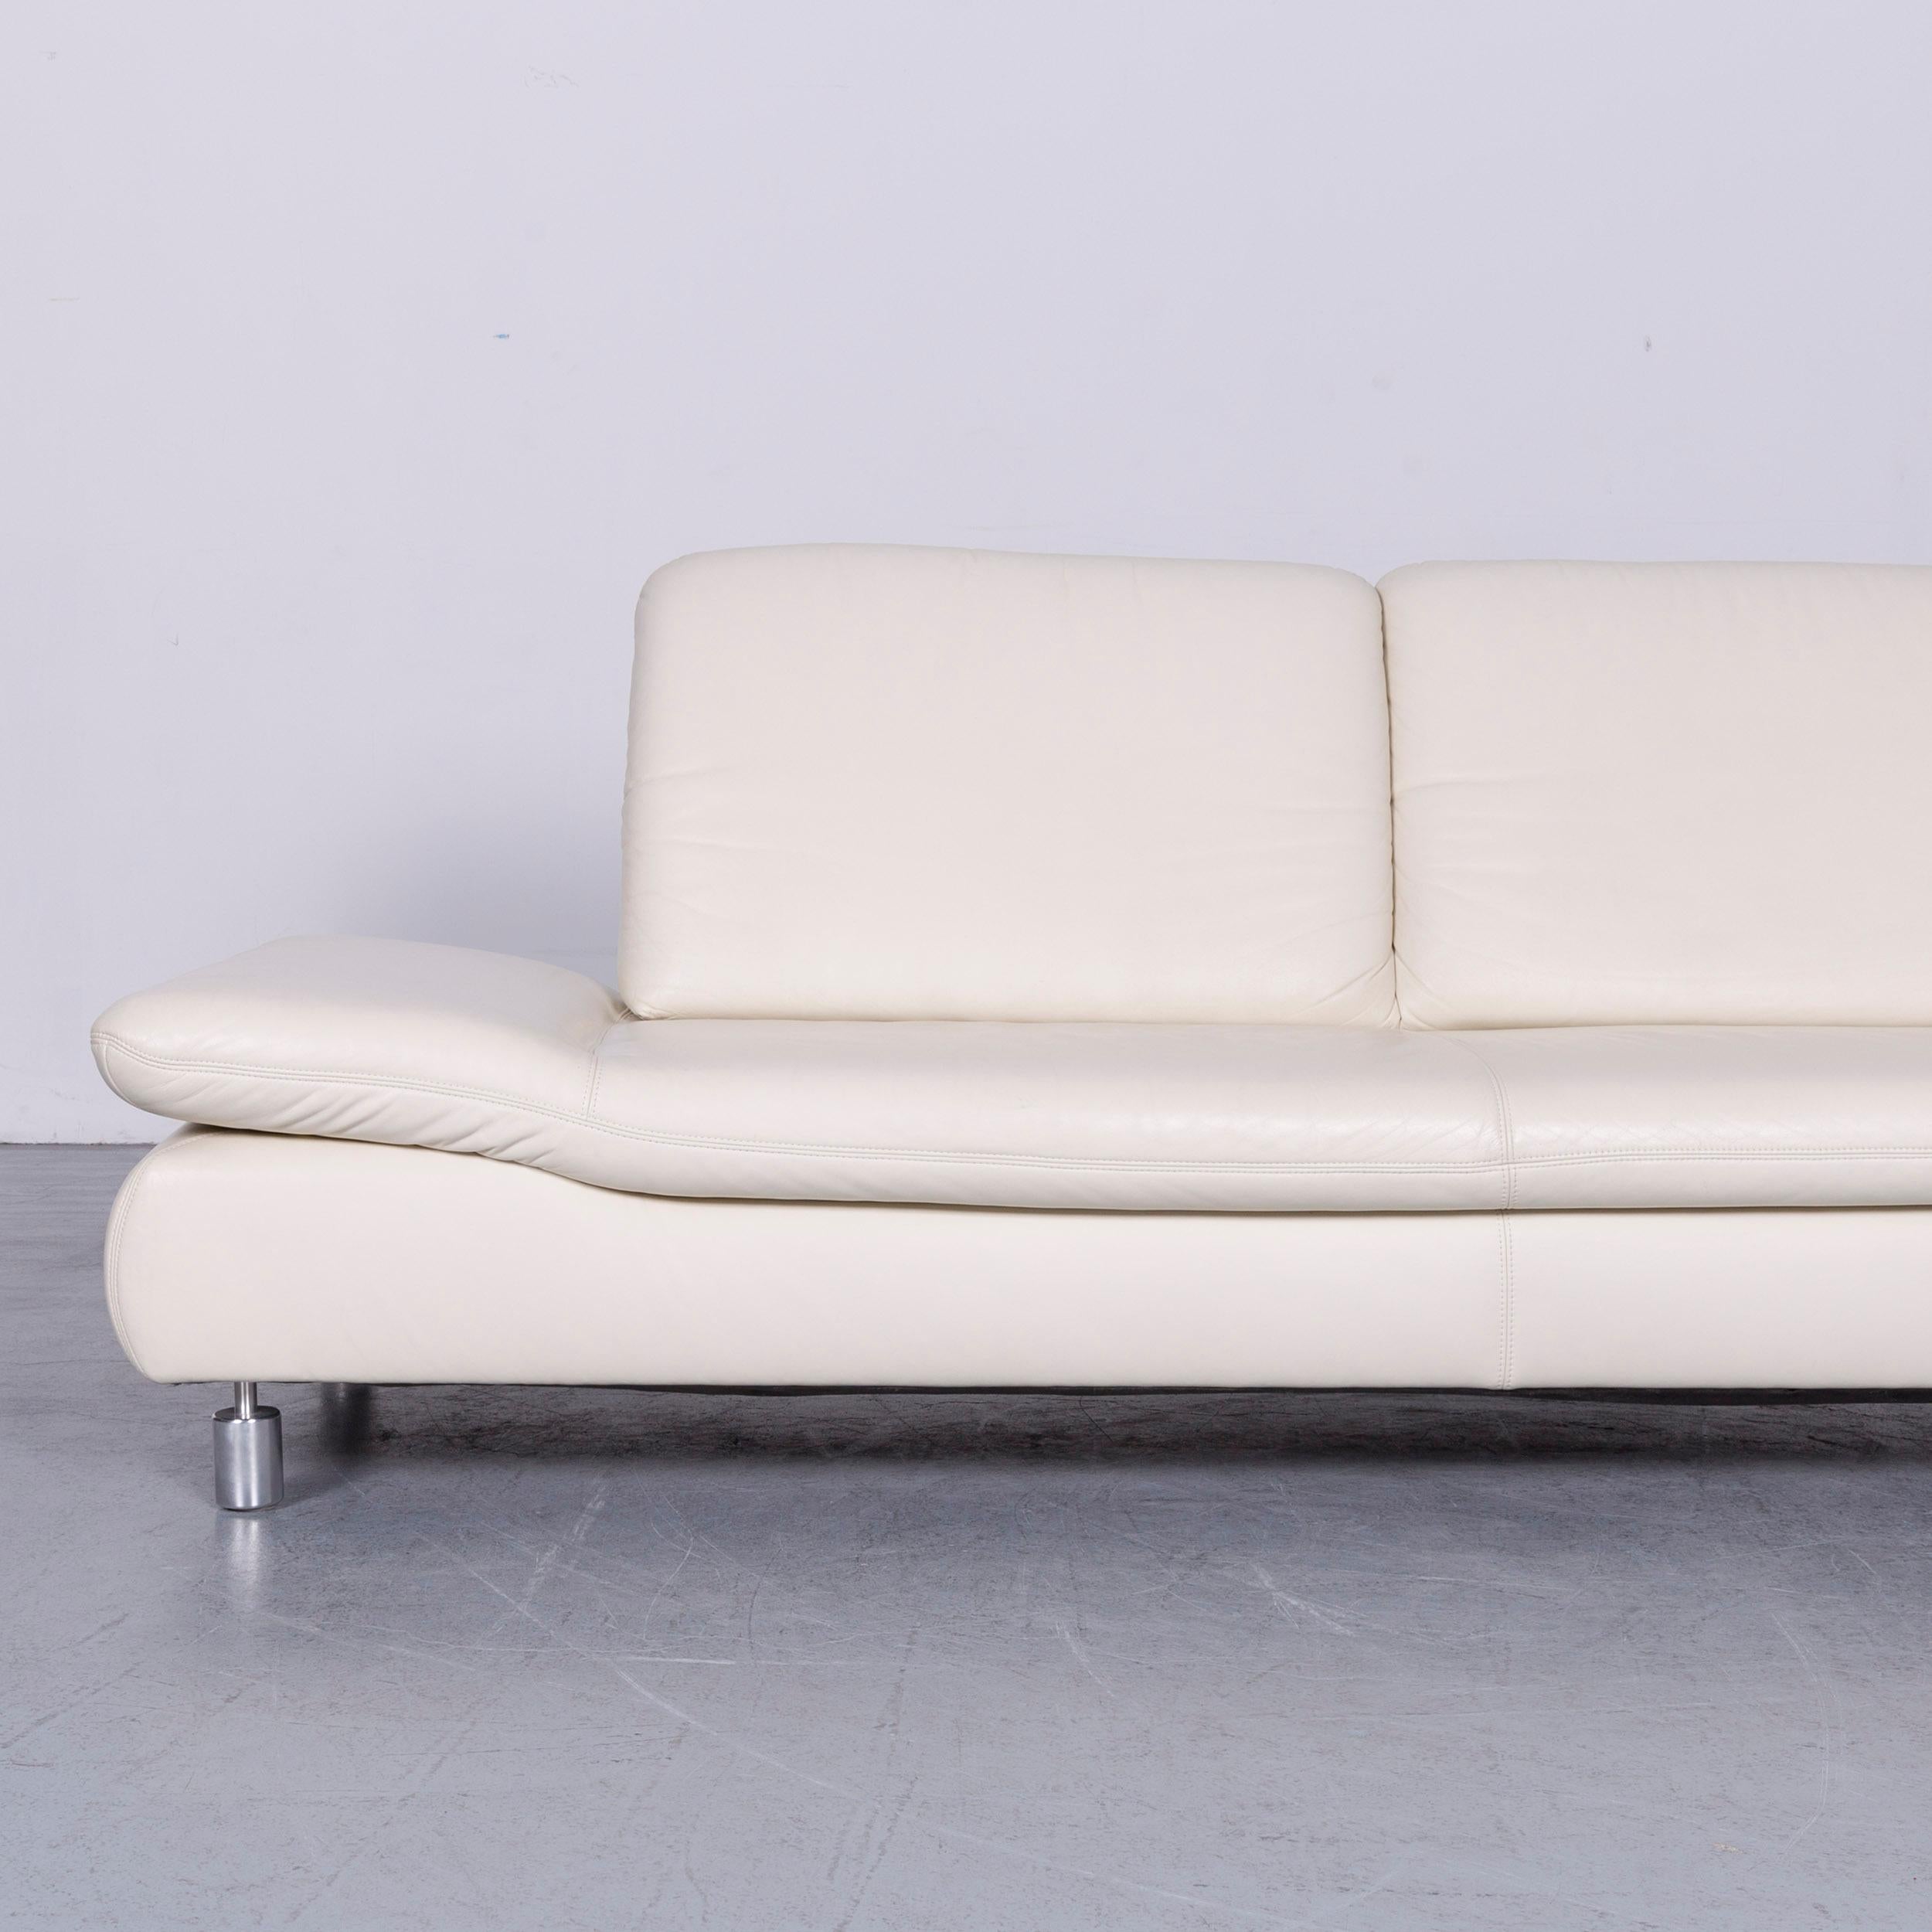 Contemporary Koinor Rivoli Designer Leather Three-Seat Sofa in White with Functions